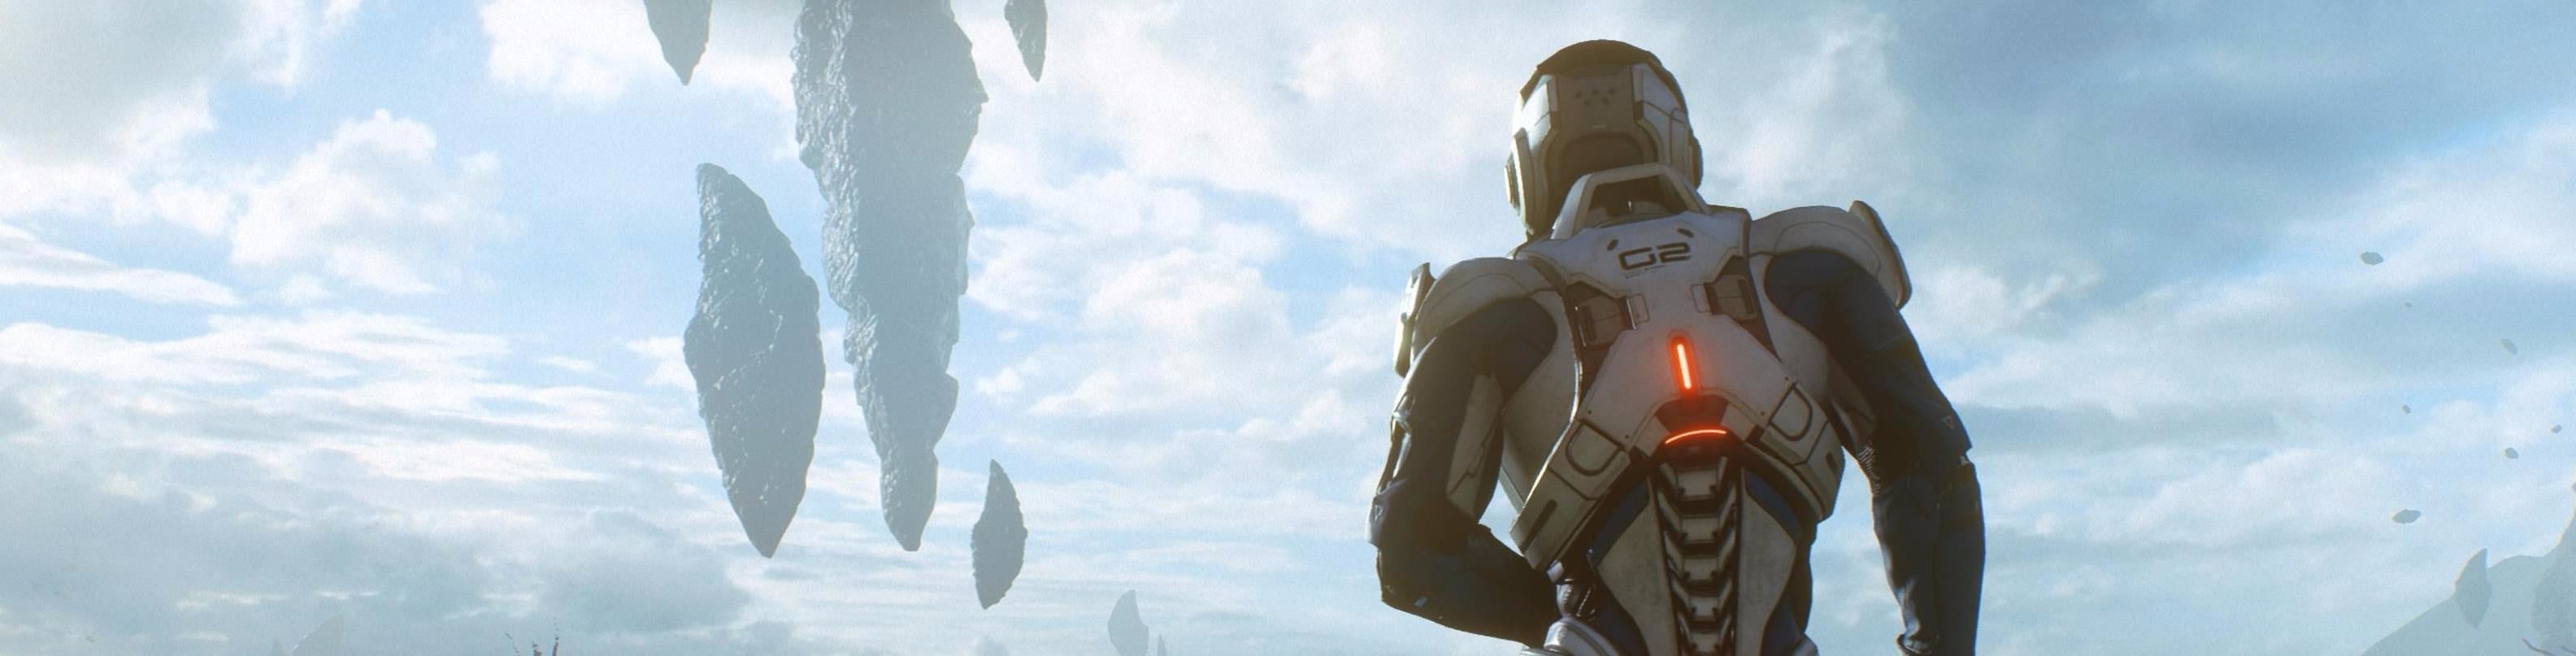 Image for Mass Effect Andromeda is another failure for trans representation